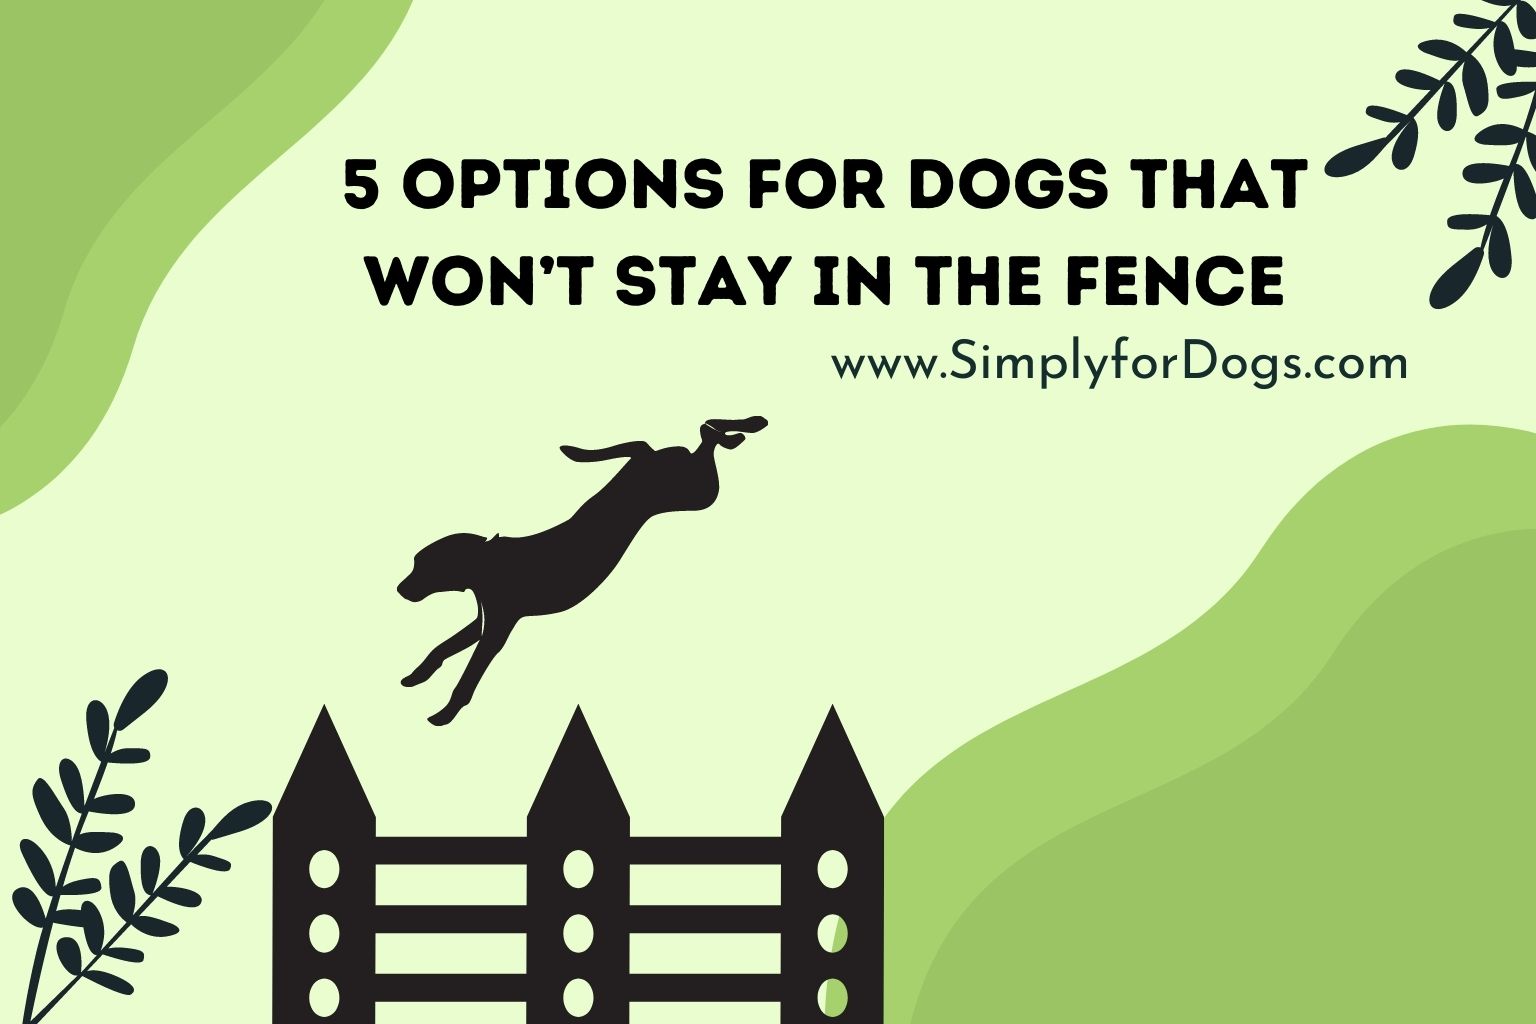 5 Options for Dogs That Won’t Stay in the Fence